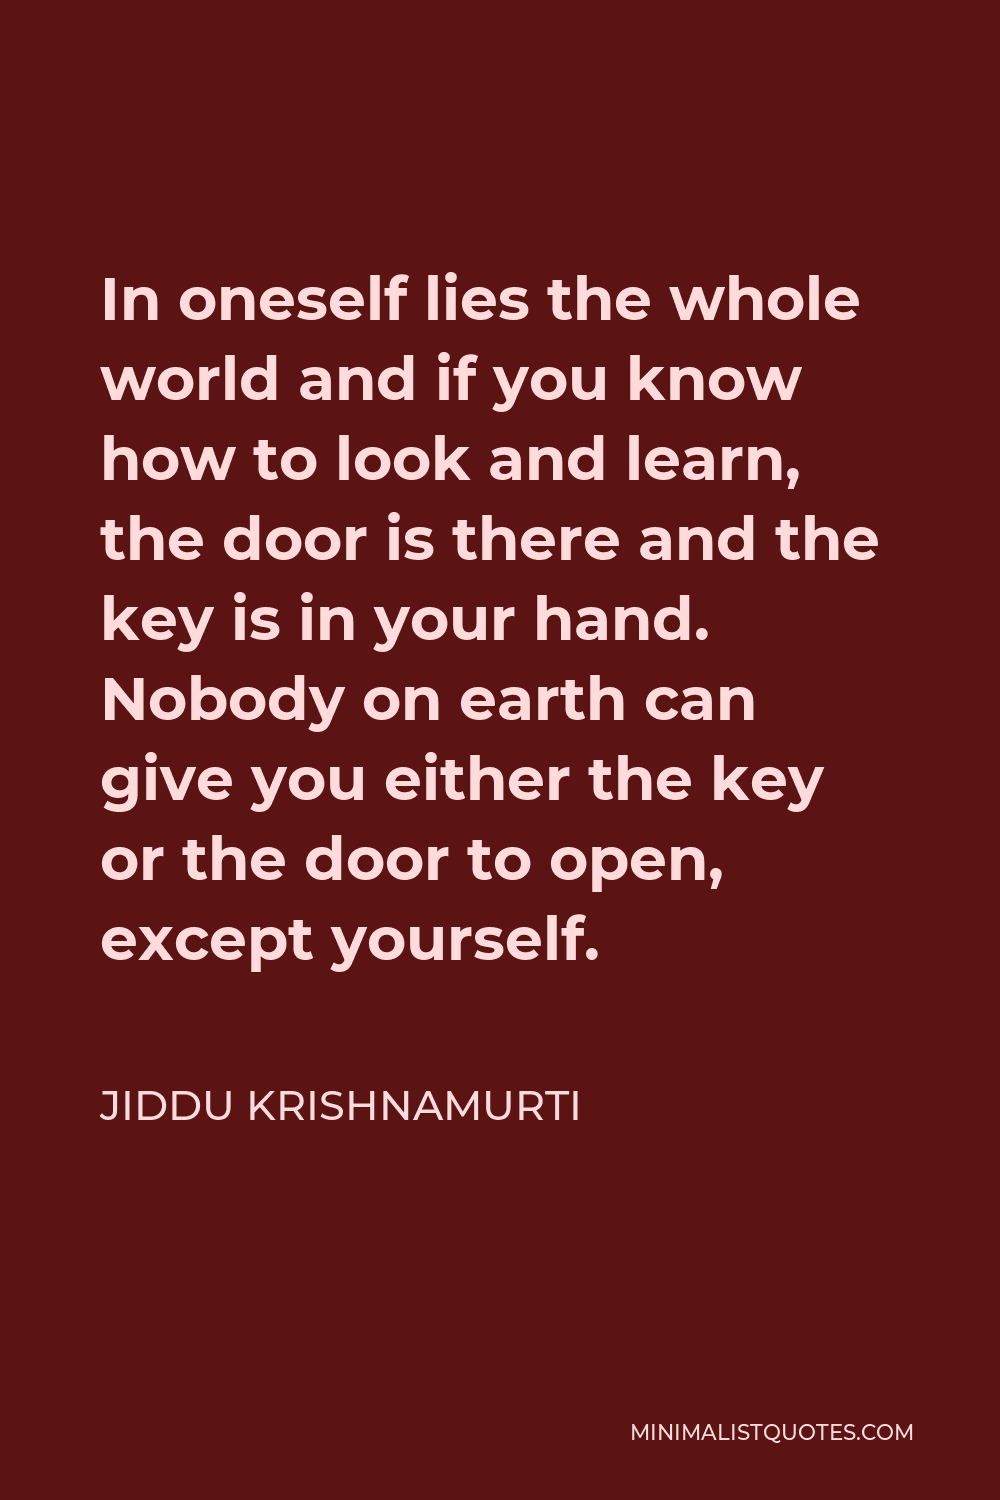 Jiddu Krishnamurti Quote - In oneself lies the whole world and if you know how to look and learn, the door is there and the key is in your hand. Nobody on earth can give you either the key or the door to open, except yourself.